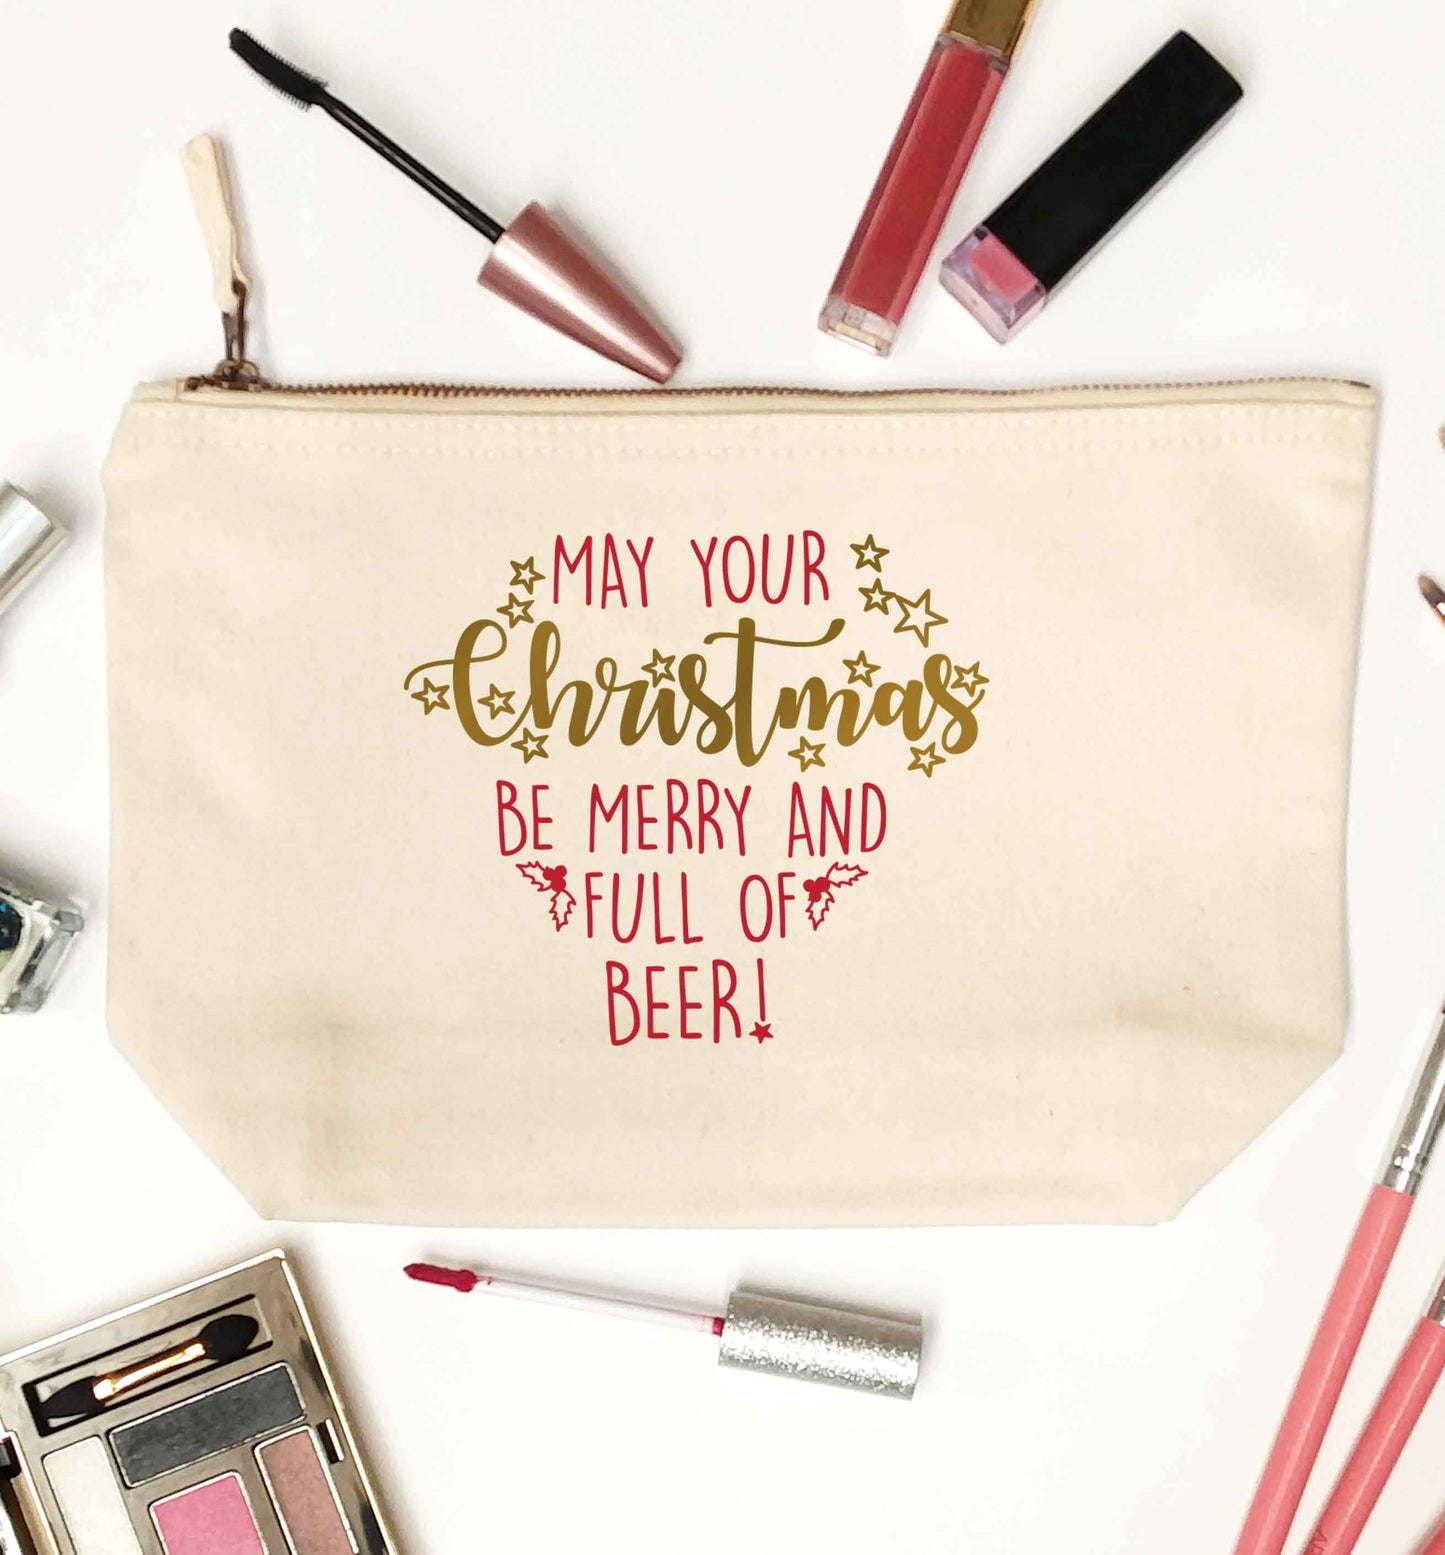 May your Christmas be merry and full of beer natural makeup bag